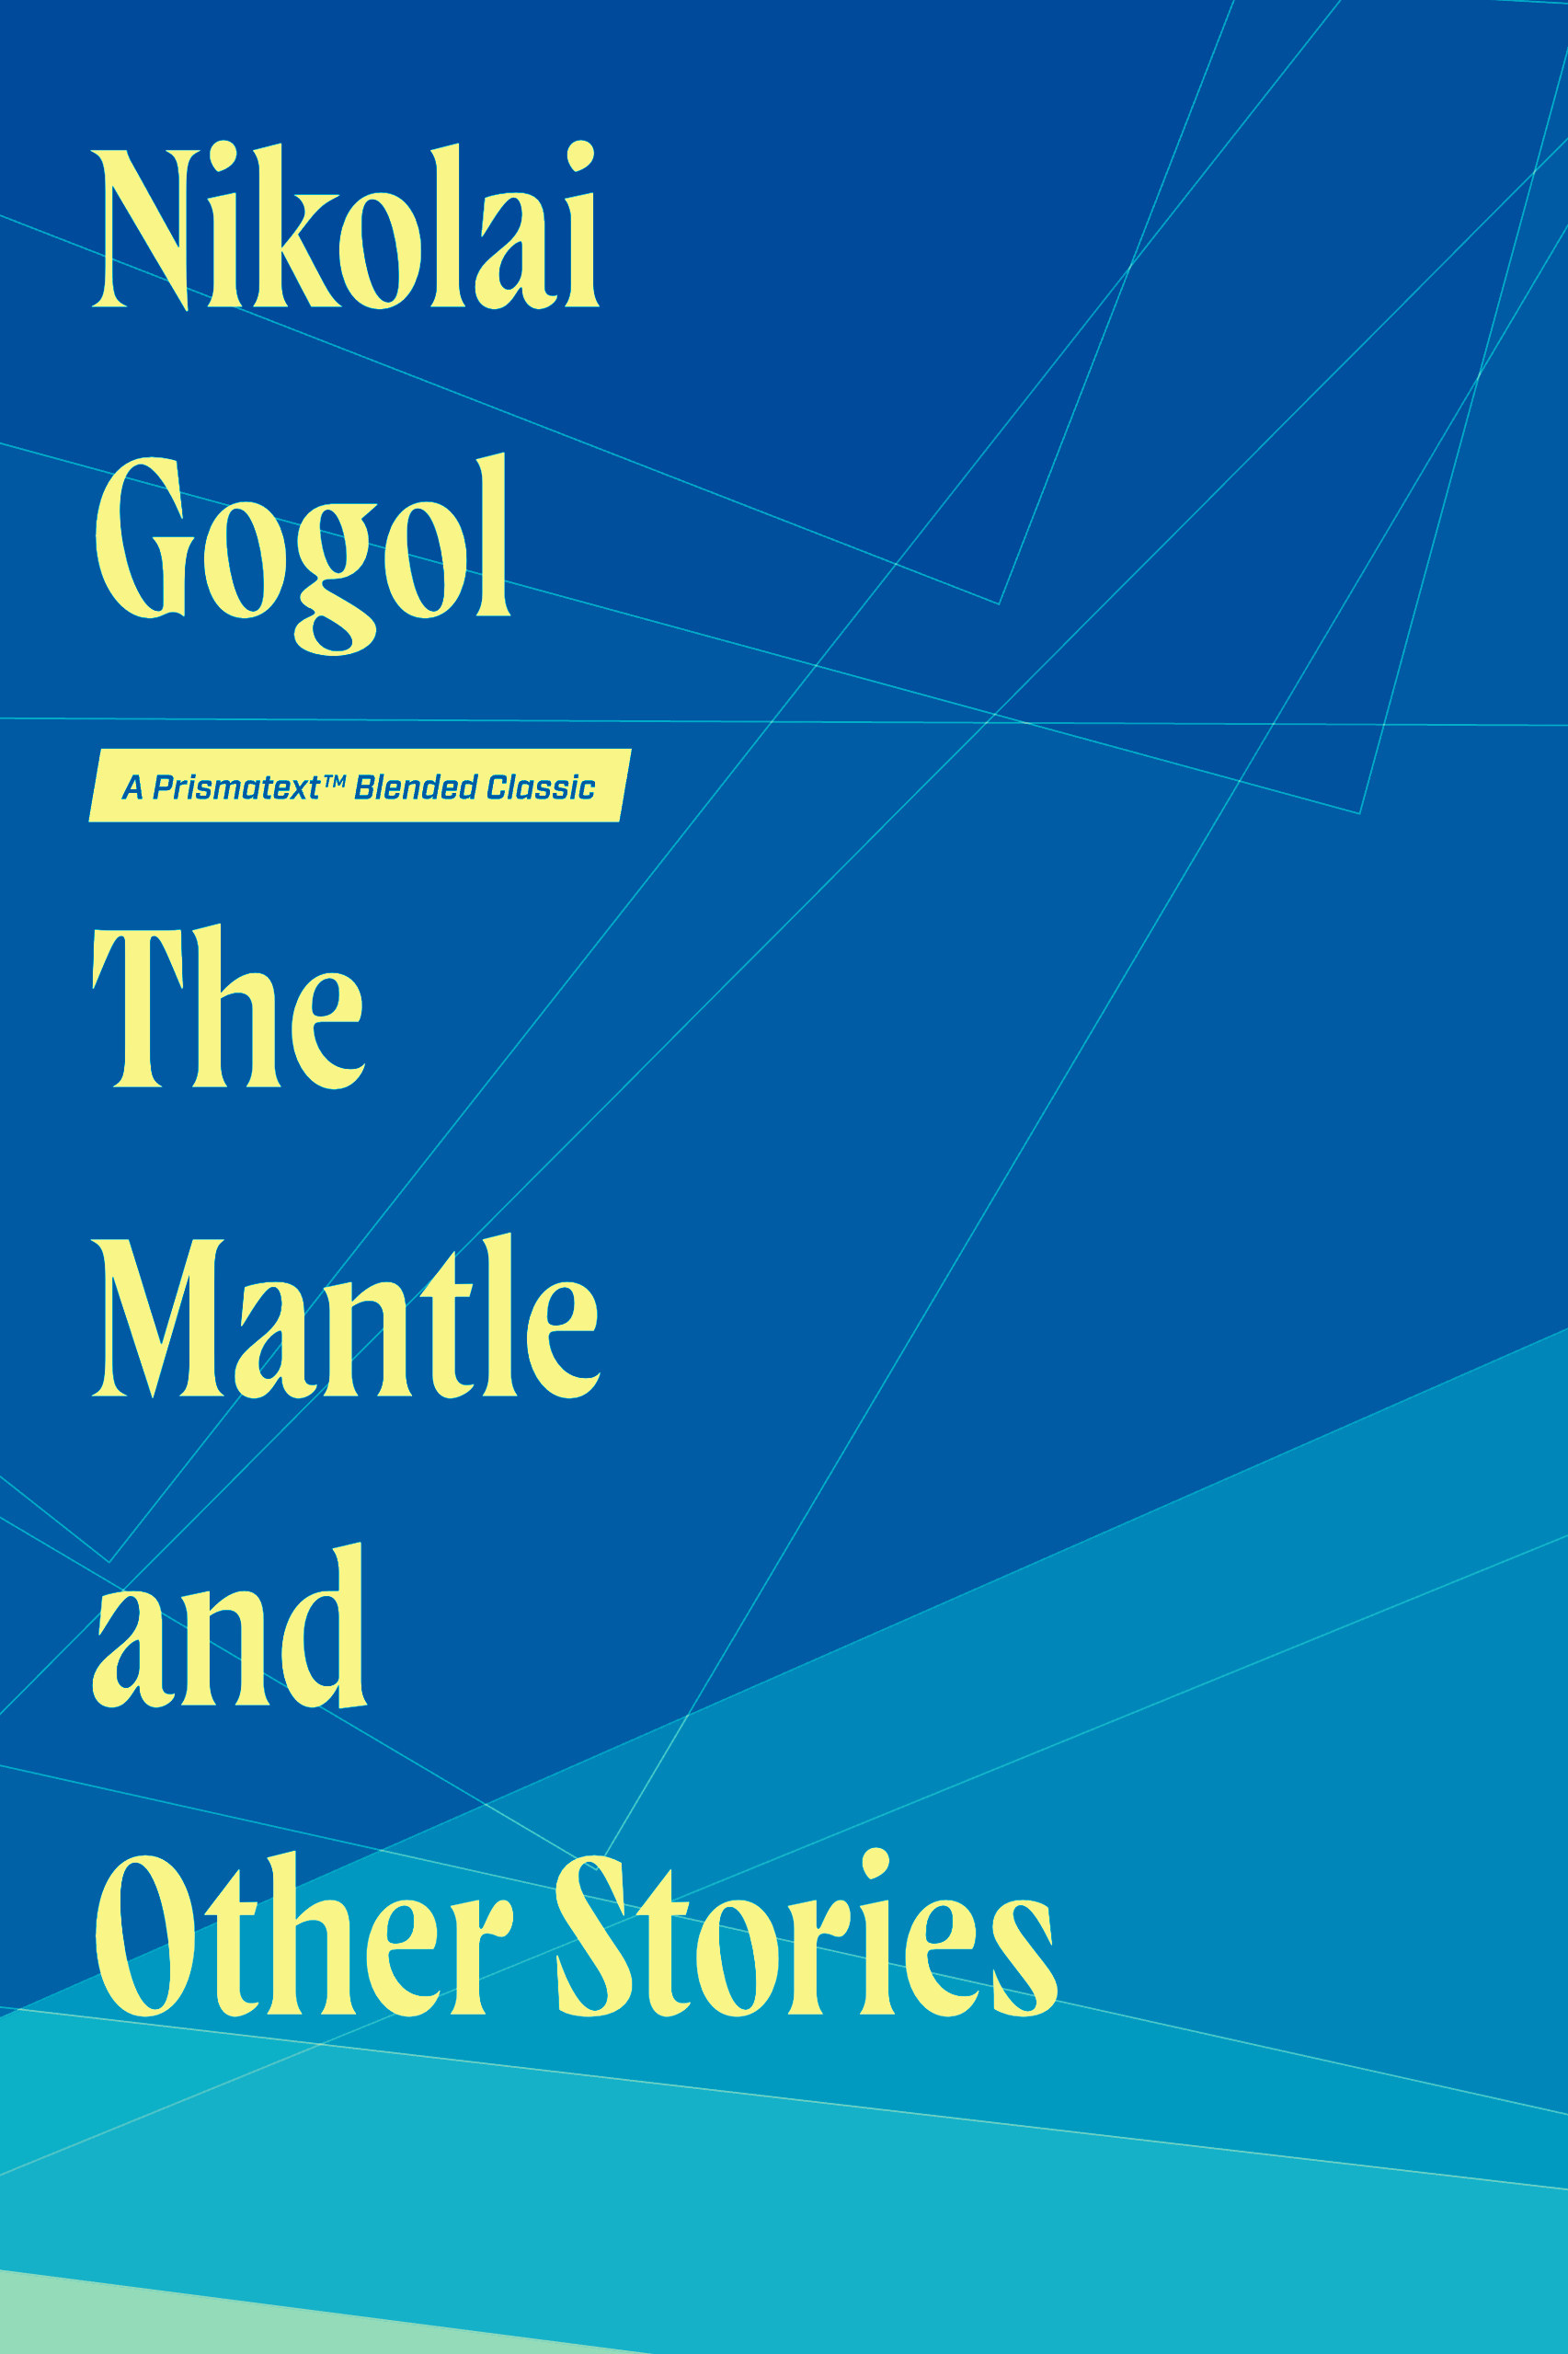 The Mantle and Other Stories by Nikolai Gogol